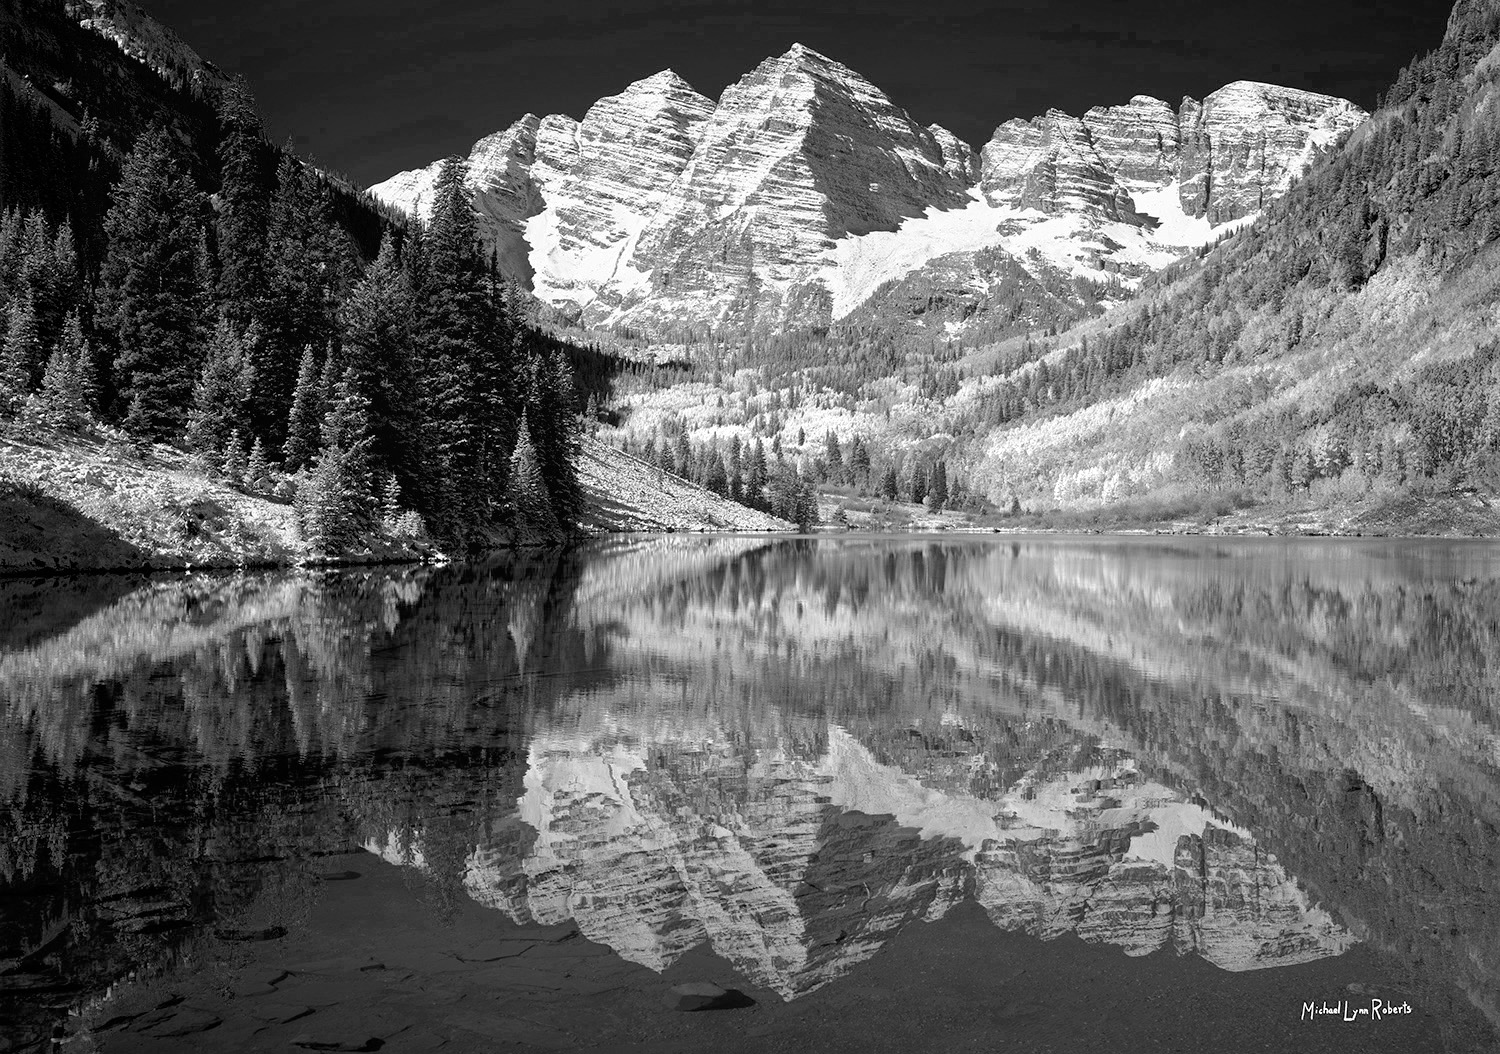 A black and white picture of the Maroon Bells twin mountain peaks with reflection in Maroon Lake, near Aspen, Colorado.